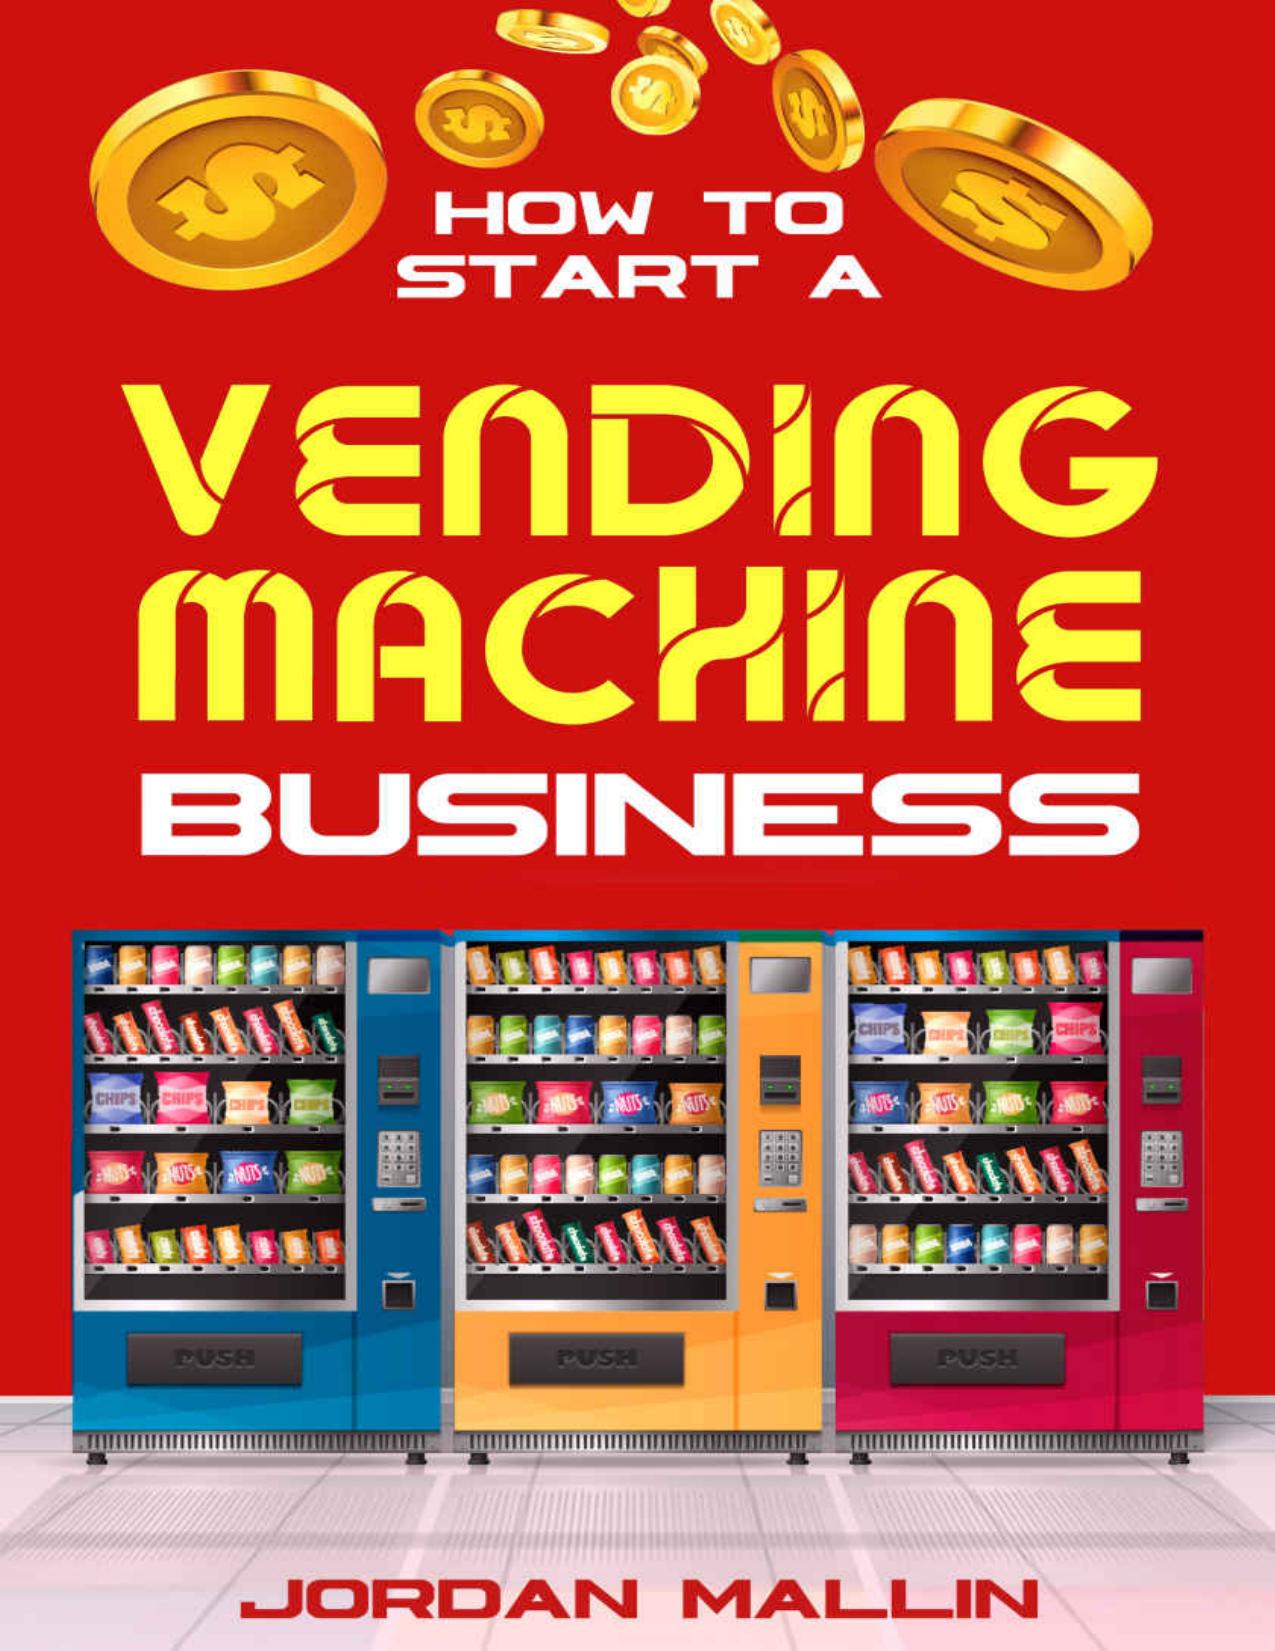 How To Start A Vending Machine Business: In These 7 Simple Steps You'll Discover How to Create a Monthly Full-Time Income Automatically with Little Budget and No Experience Required. by Jordan Mallin